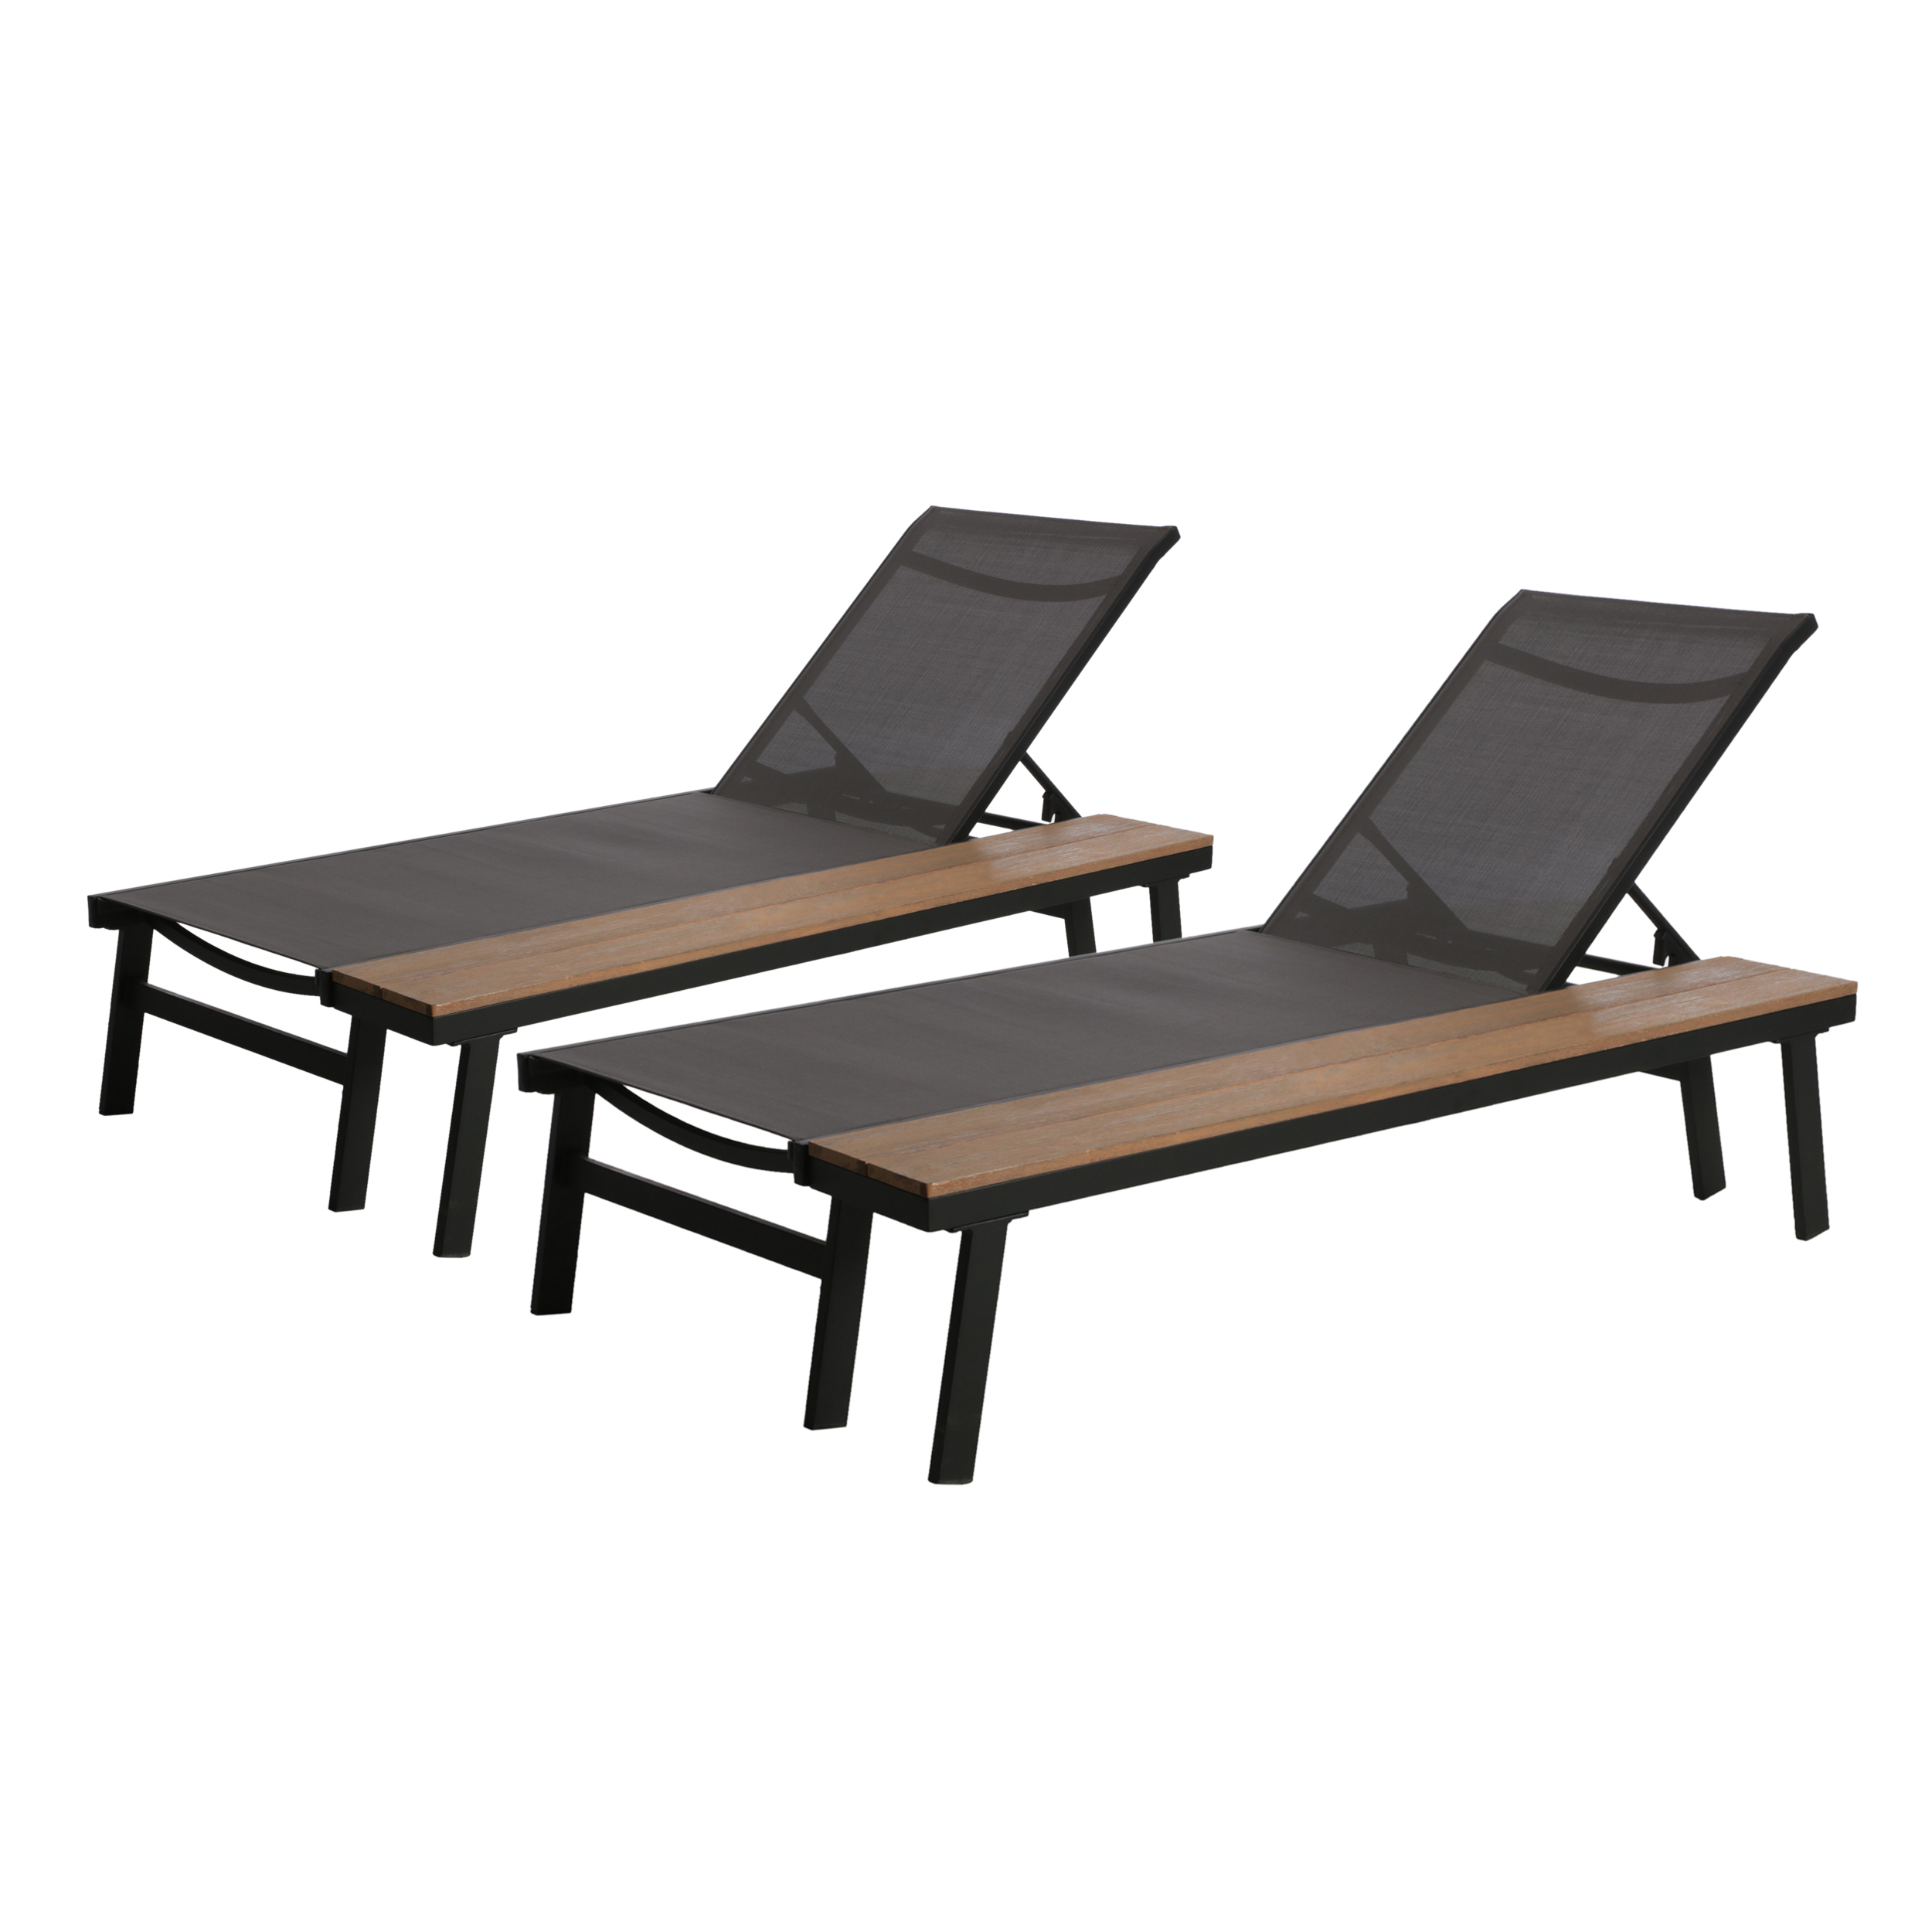 Killian Outdoor Mesh and Aluminum Chaise Lounge with Side Table, Set of 2, Gray - image 4 of 7